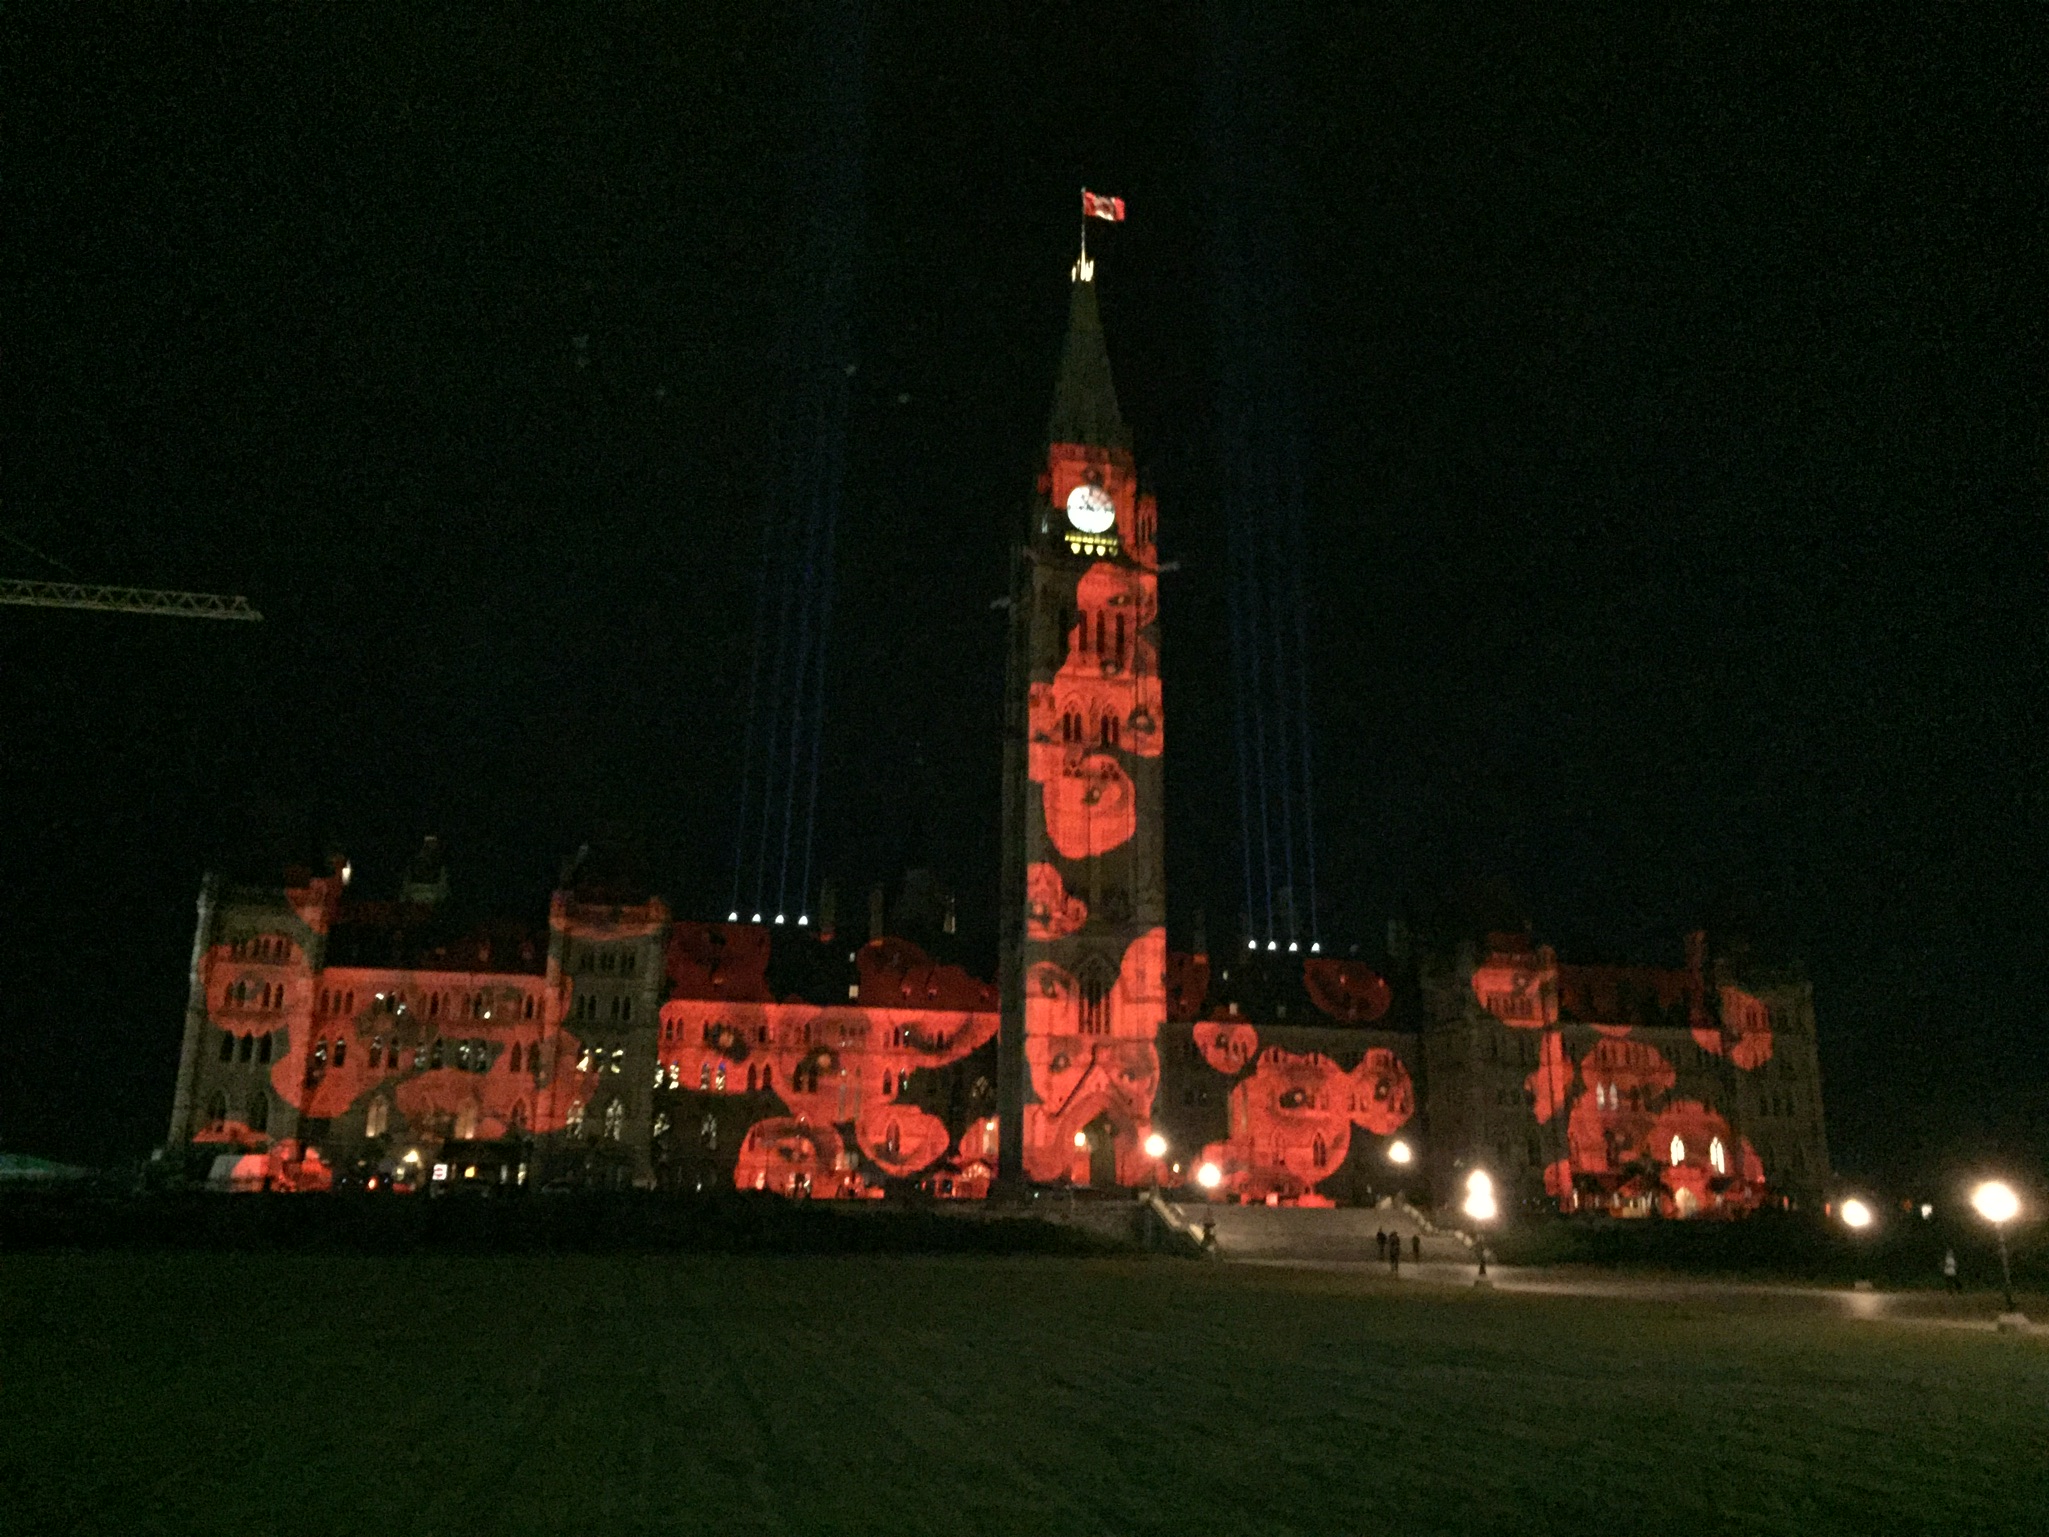 Remembrance Day in Ottawa